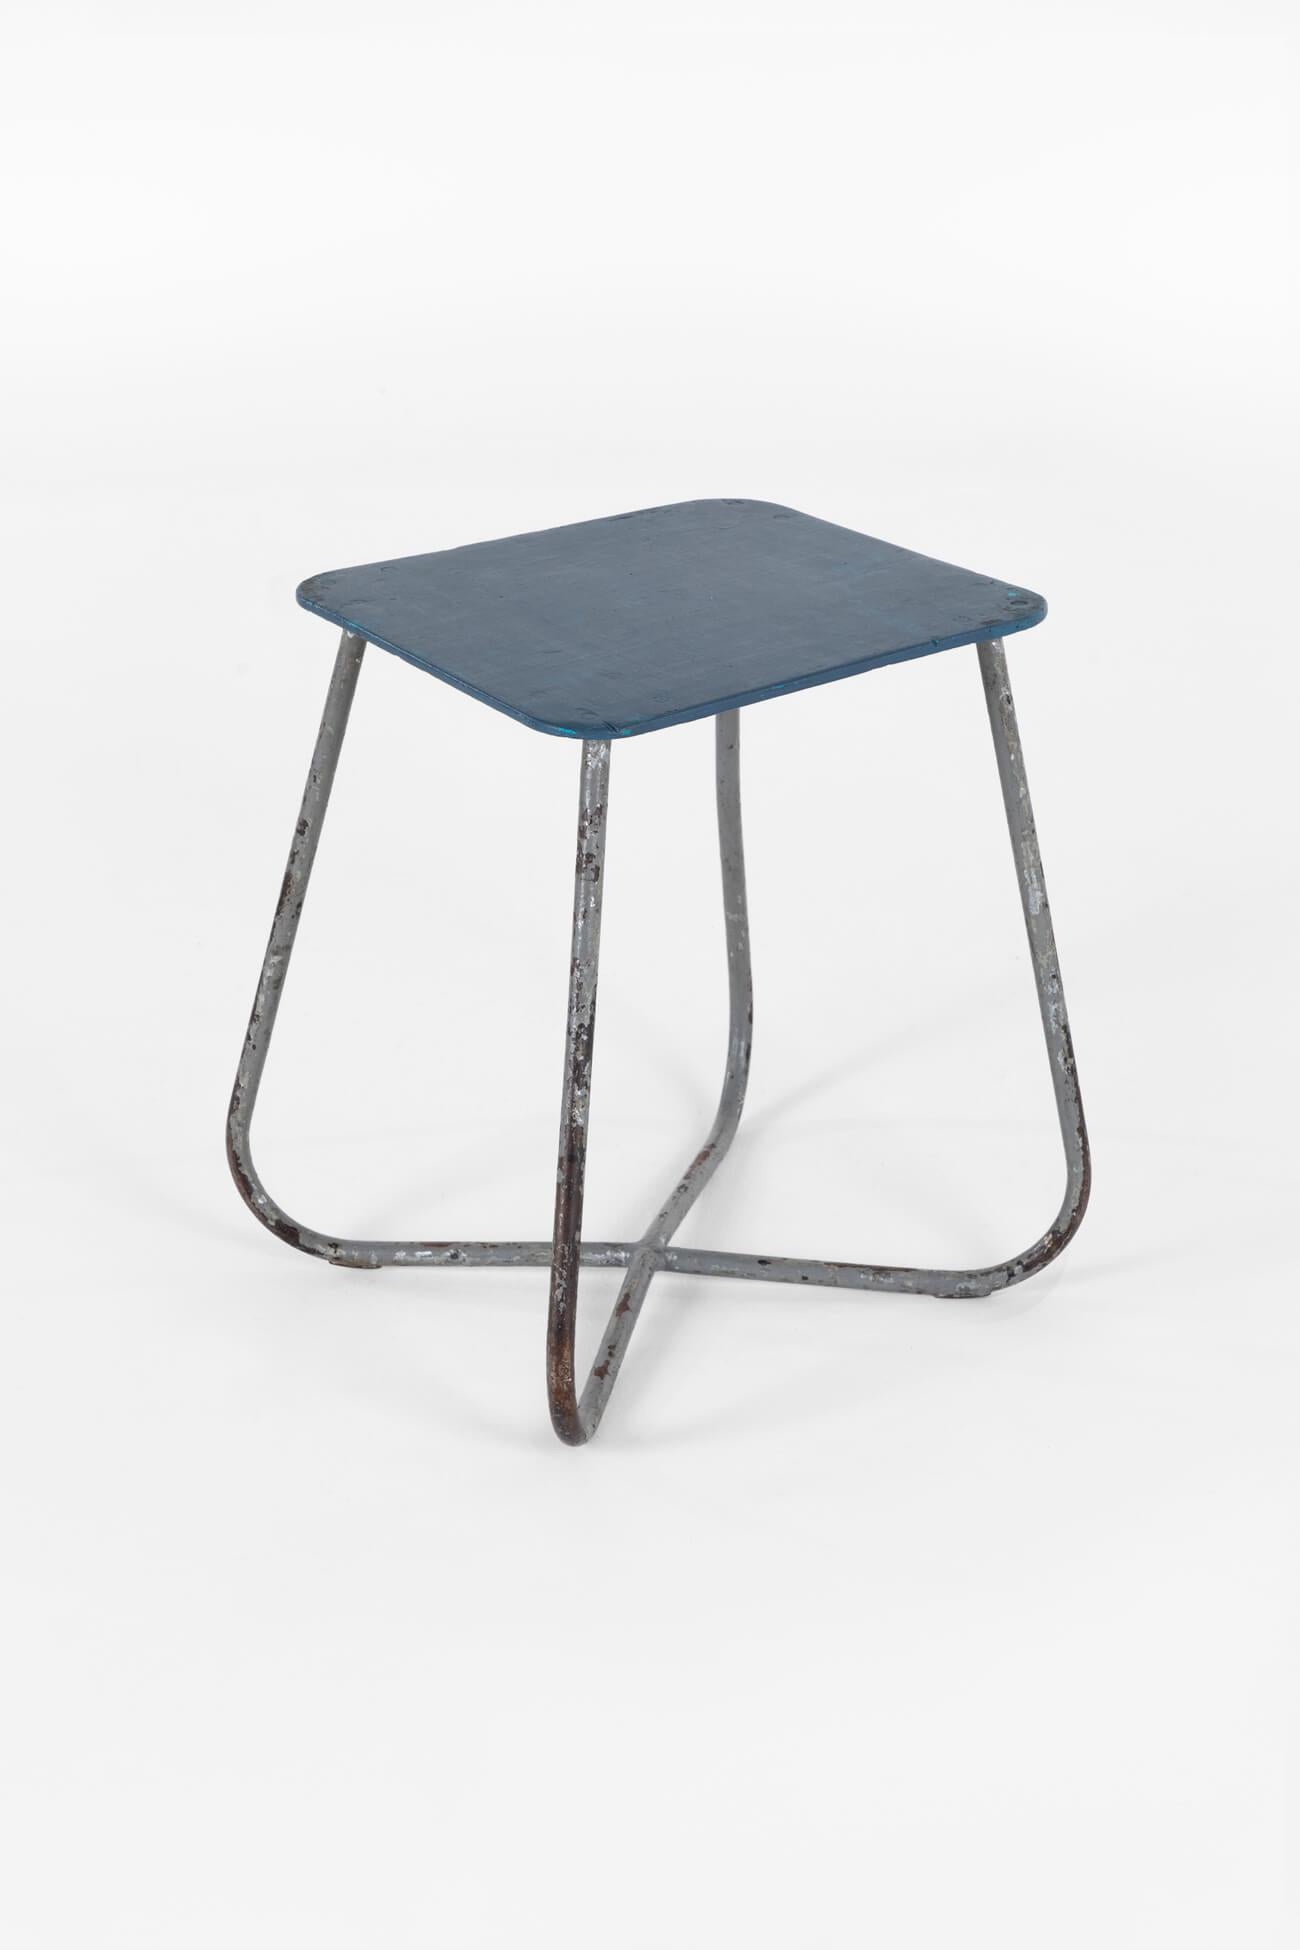 Four Industrial Stools For Sale 2